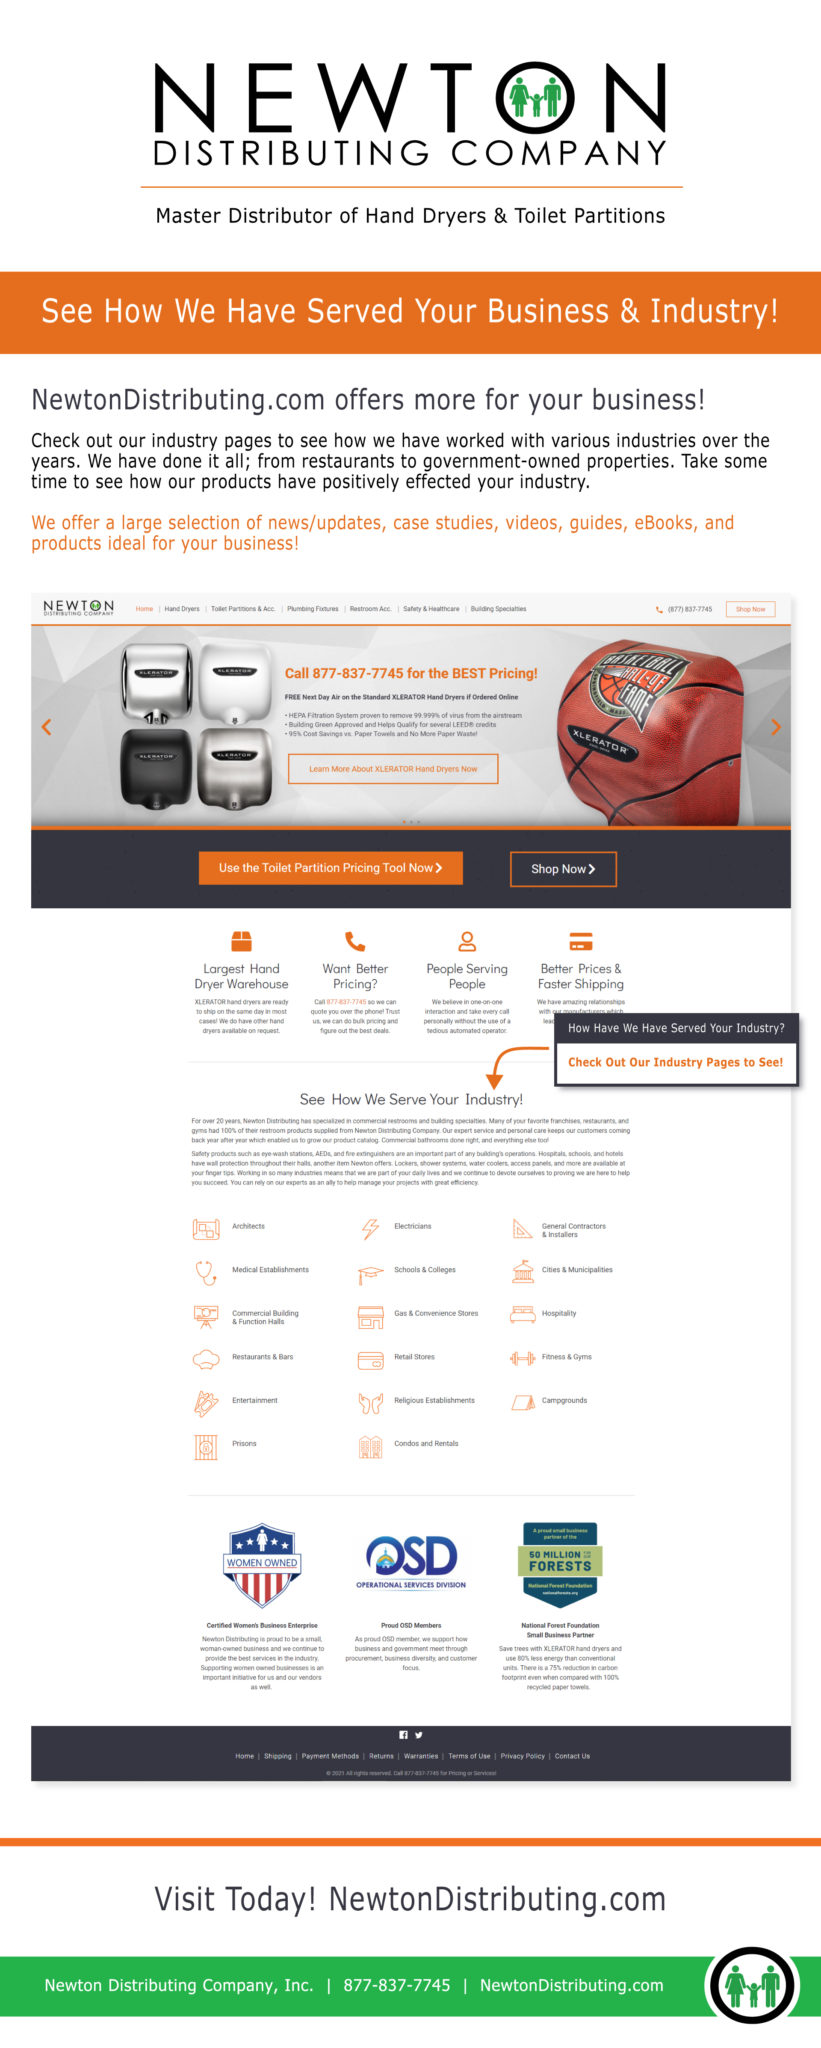 See How Newton Distributing Has Served Hand Dryers in your Industry Infographic